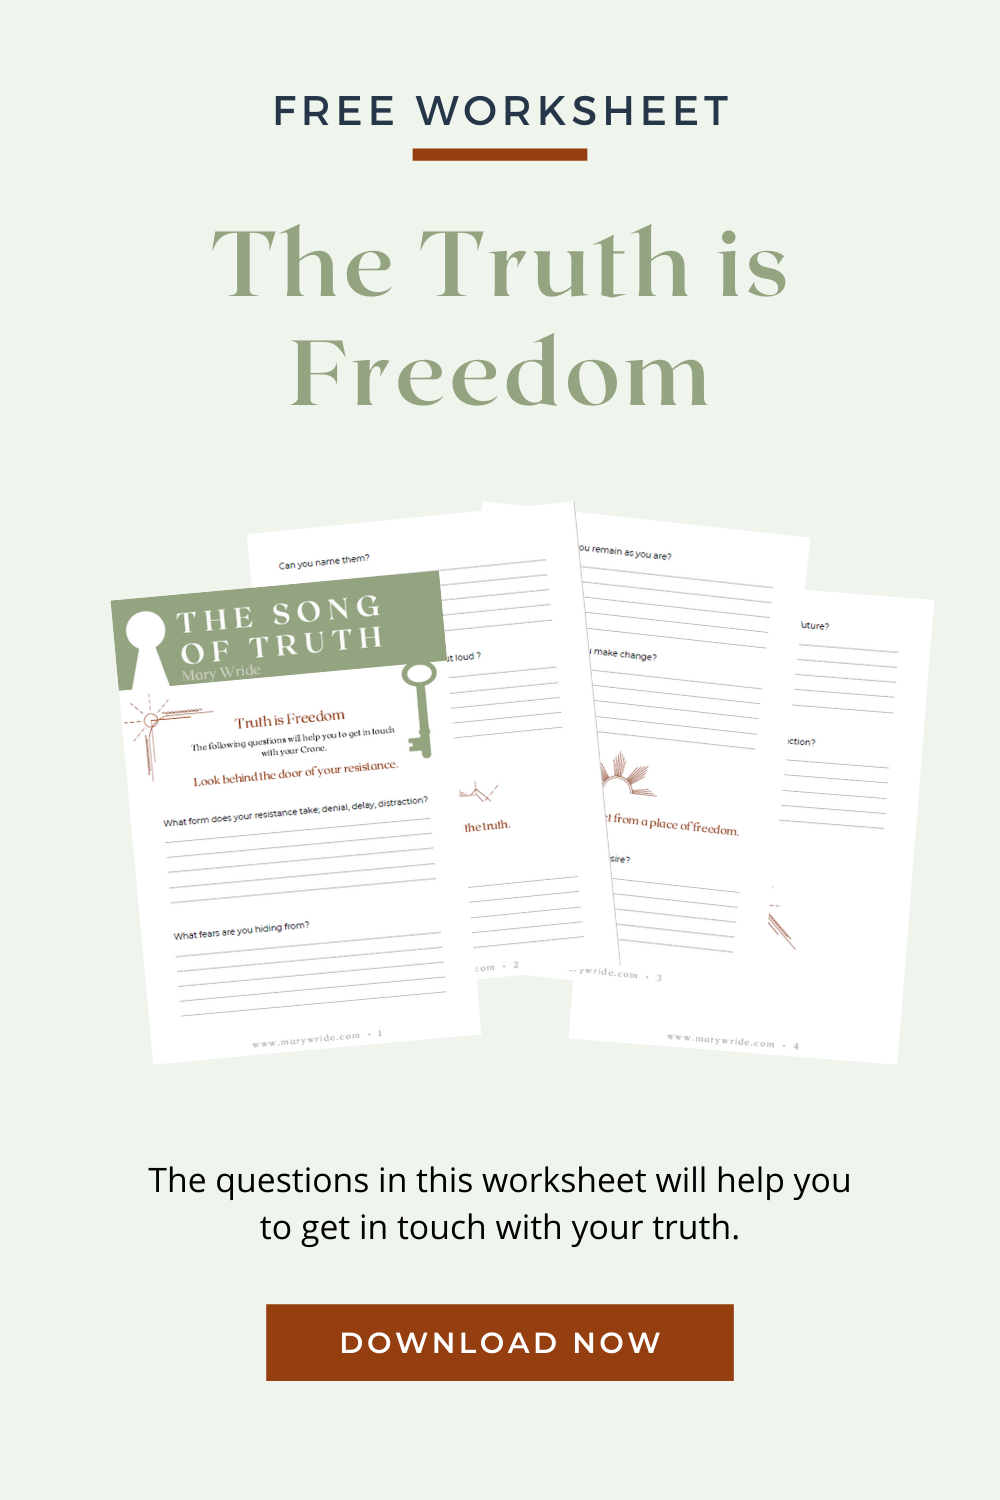 guided-practice-freedom-of-religion-worksheet